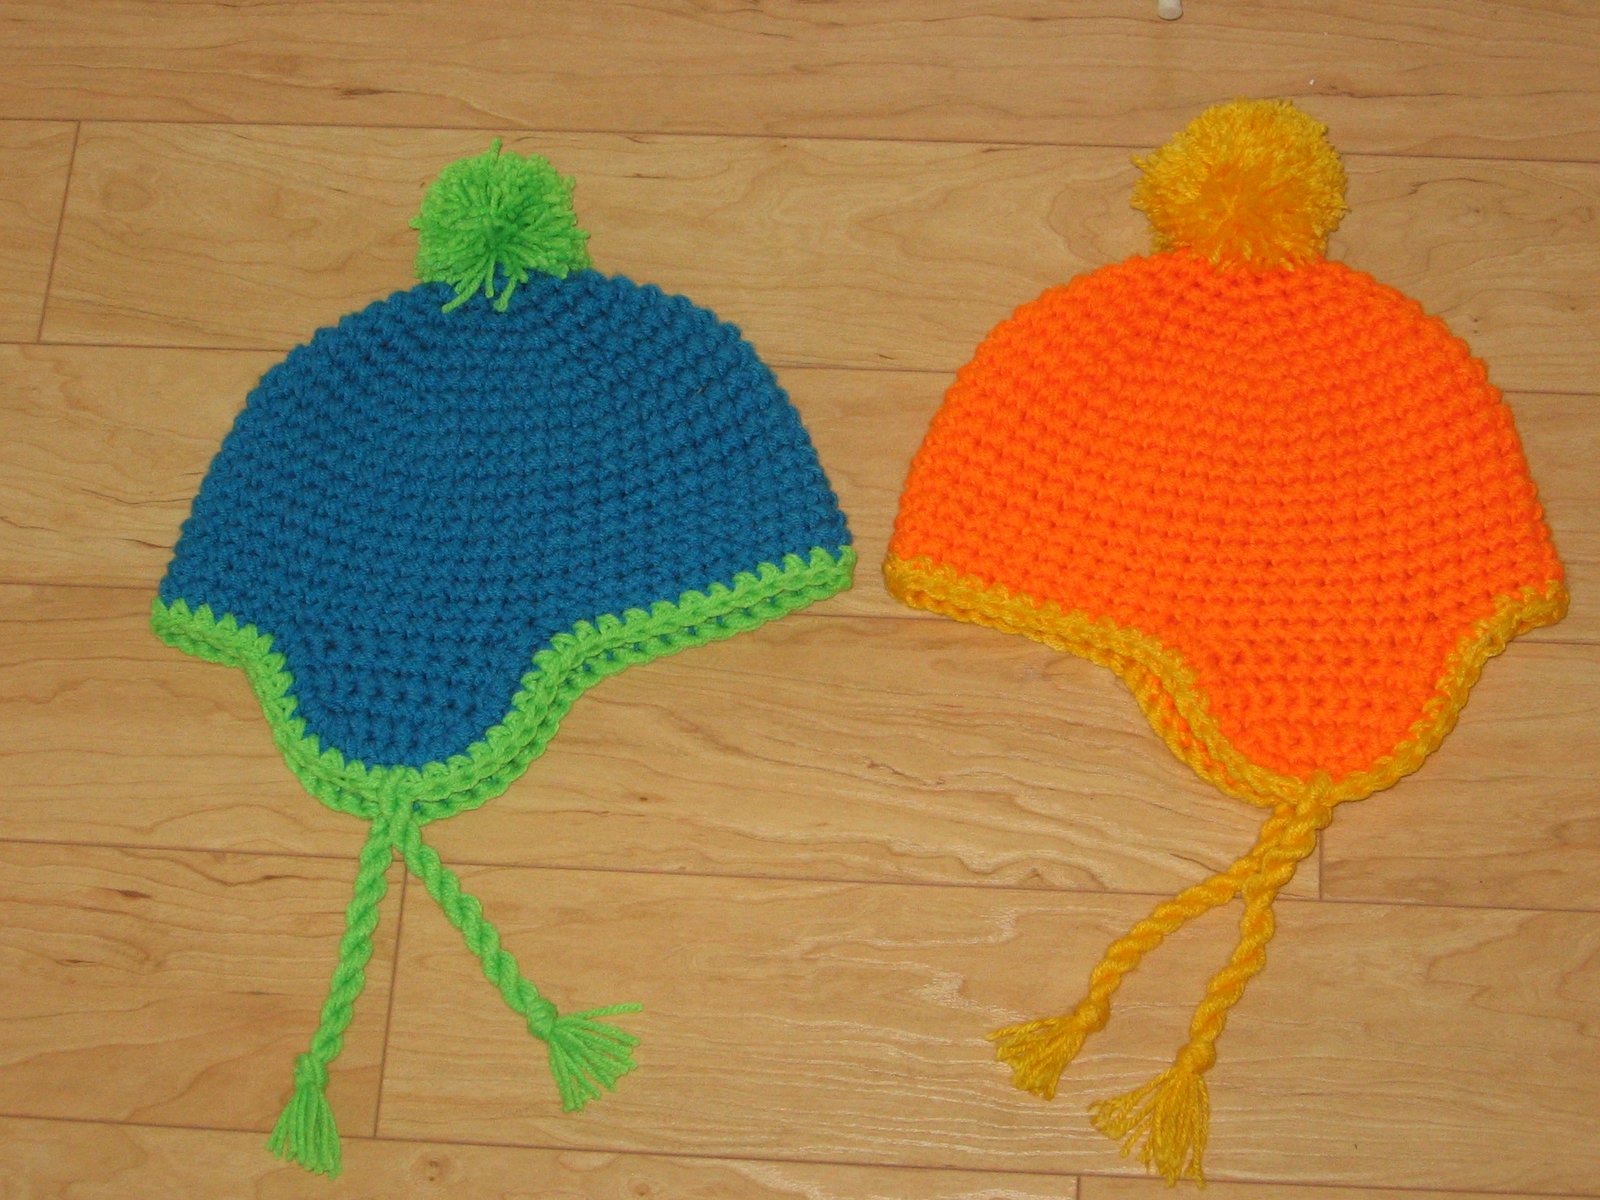 First earflap hats